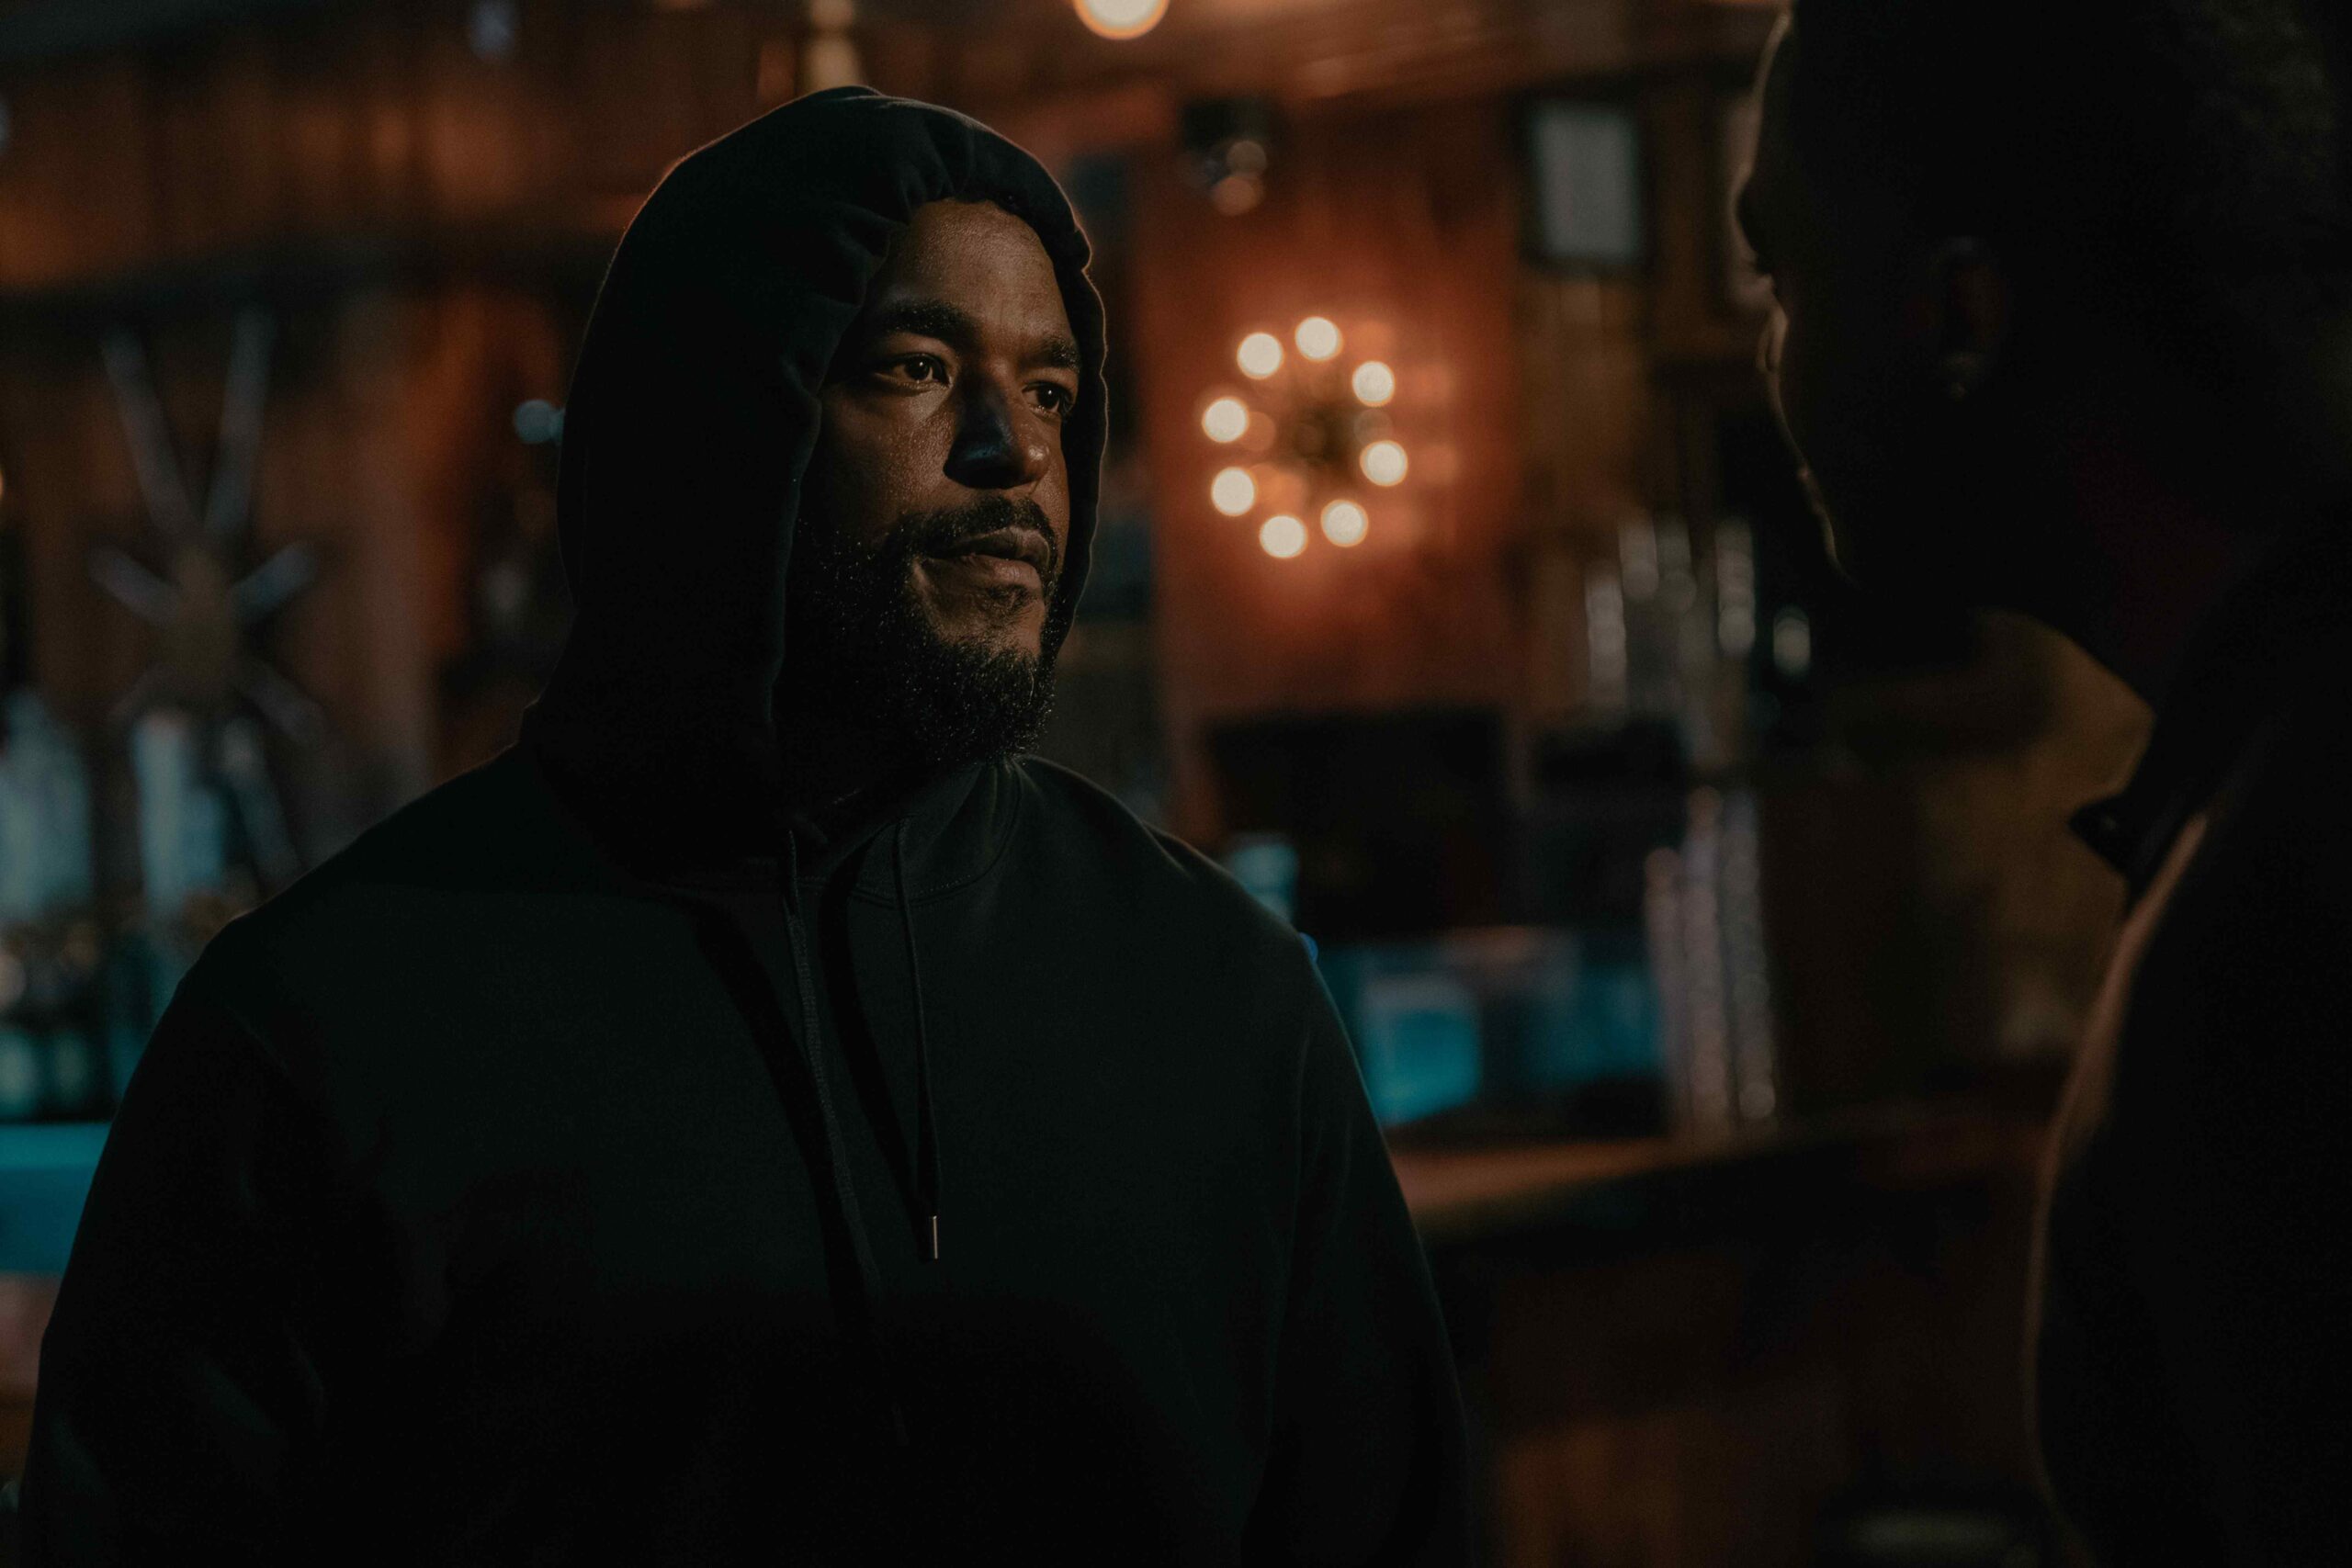 'The Chi': Luke James Says Additional Season 6 Episodes 'Flesh Out' The Characters In A 'Cool, Grounded Way'